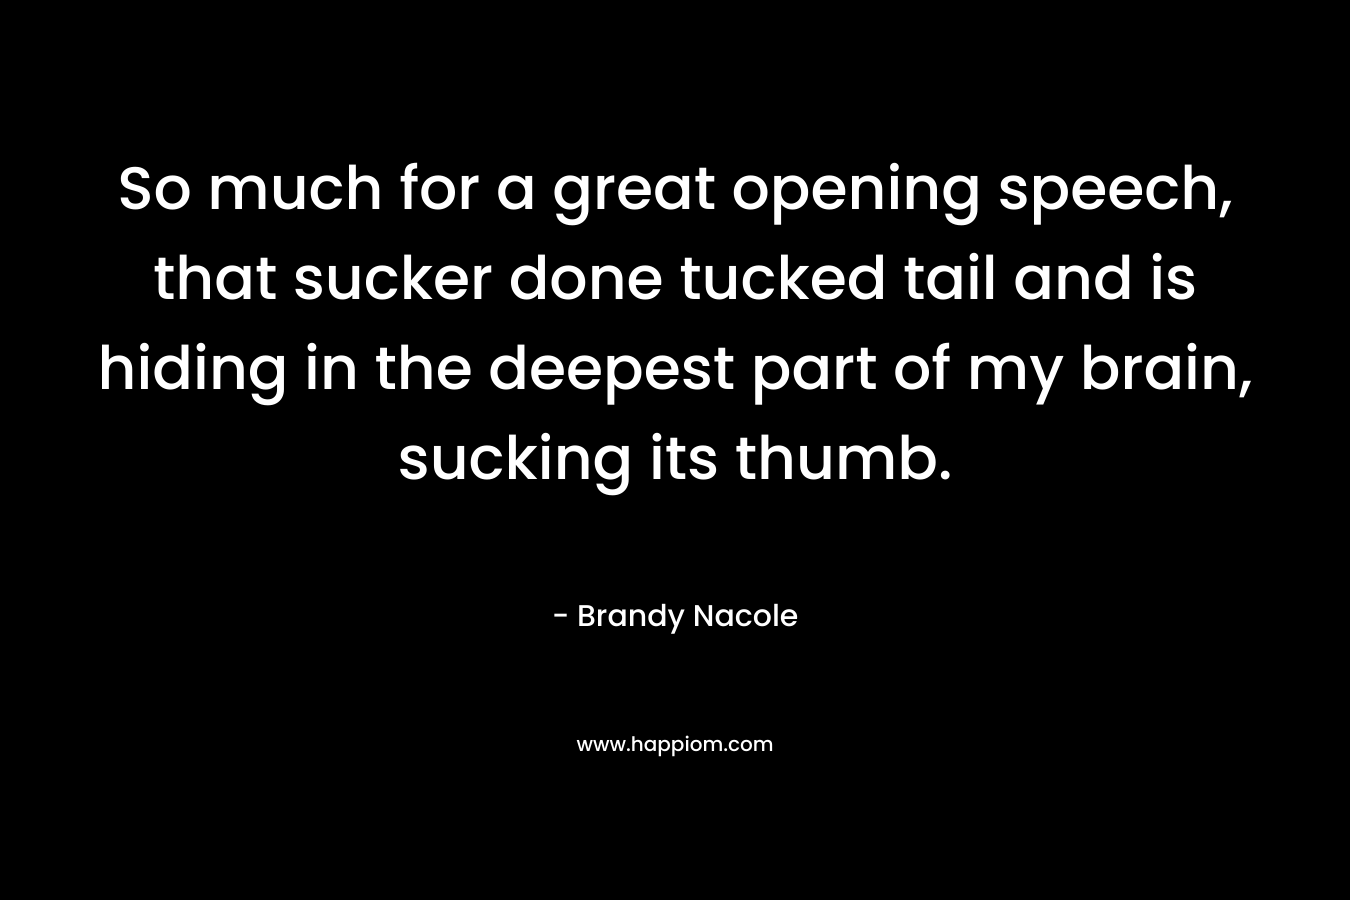 So much for a great opening speech, that sucker done tucked tail and is hiding in the deepest part of my brain, sucking its thumb. – Brandy Nacole